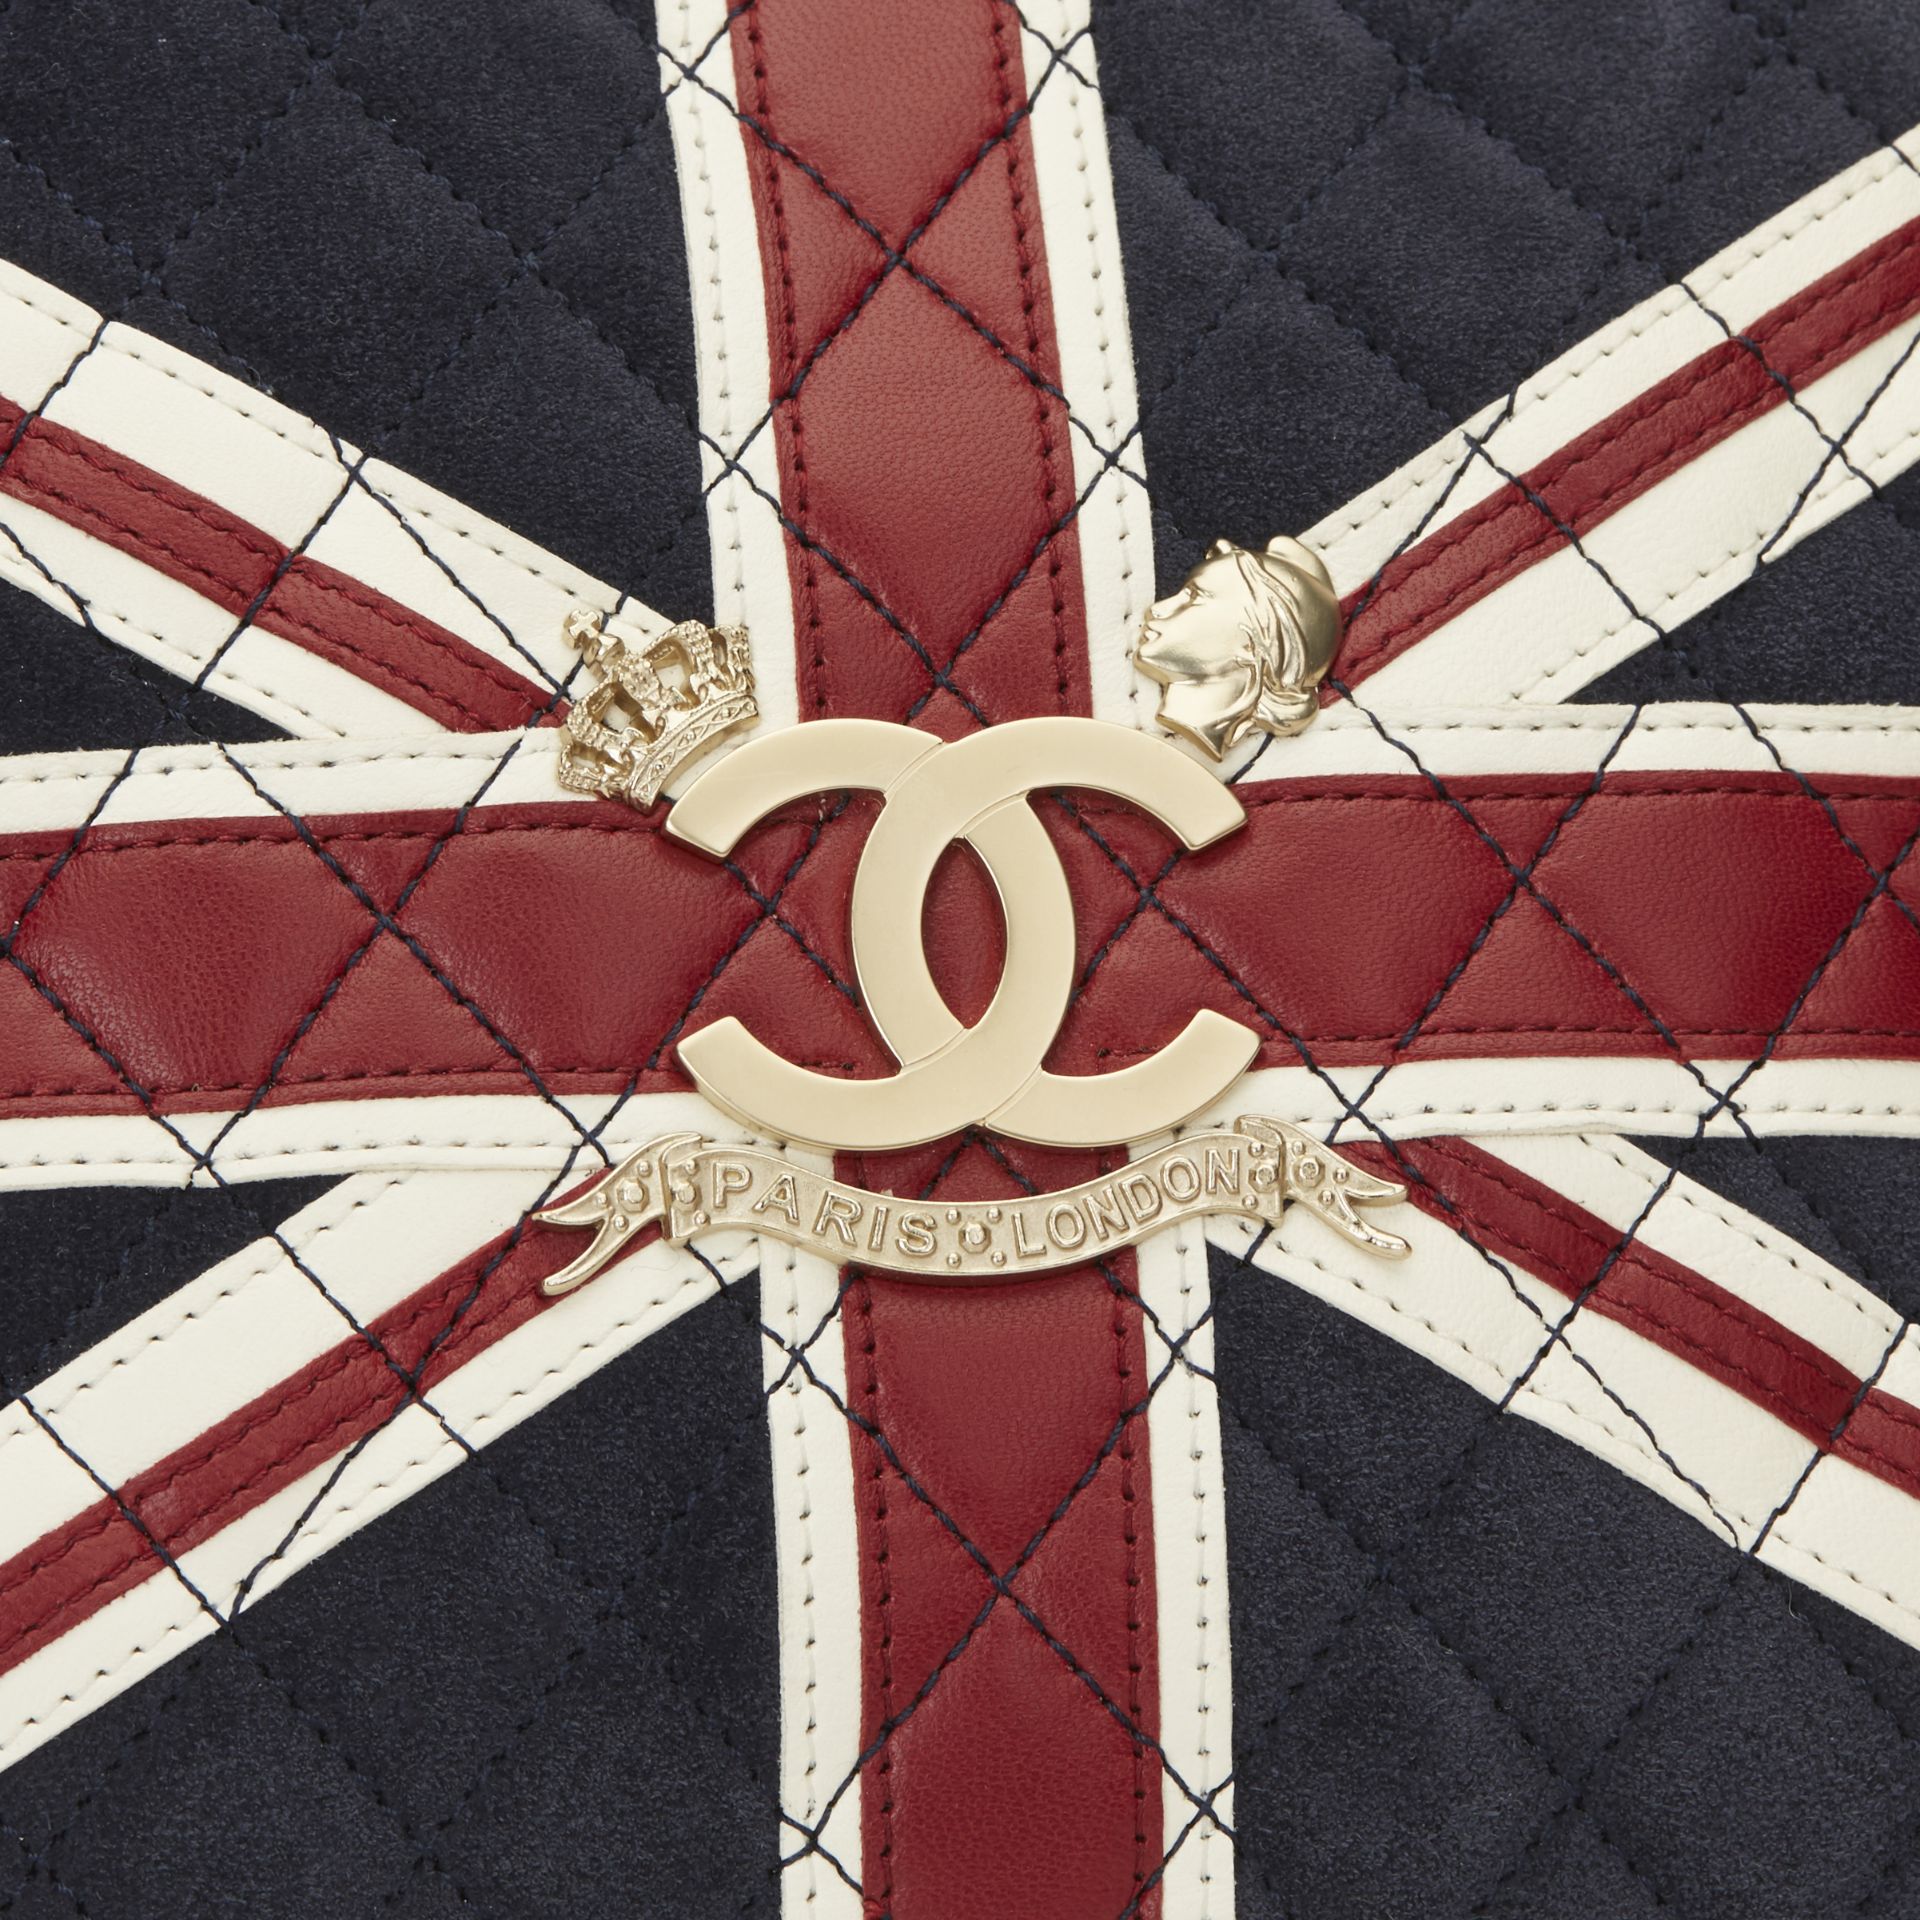 Chanel Union Jack Pouch - Image 6 of 10